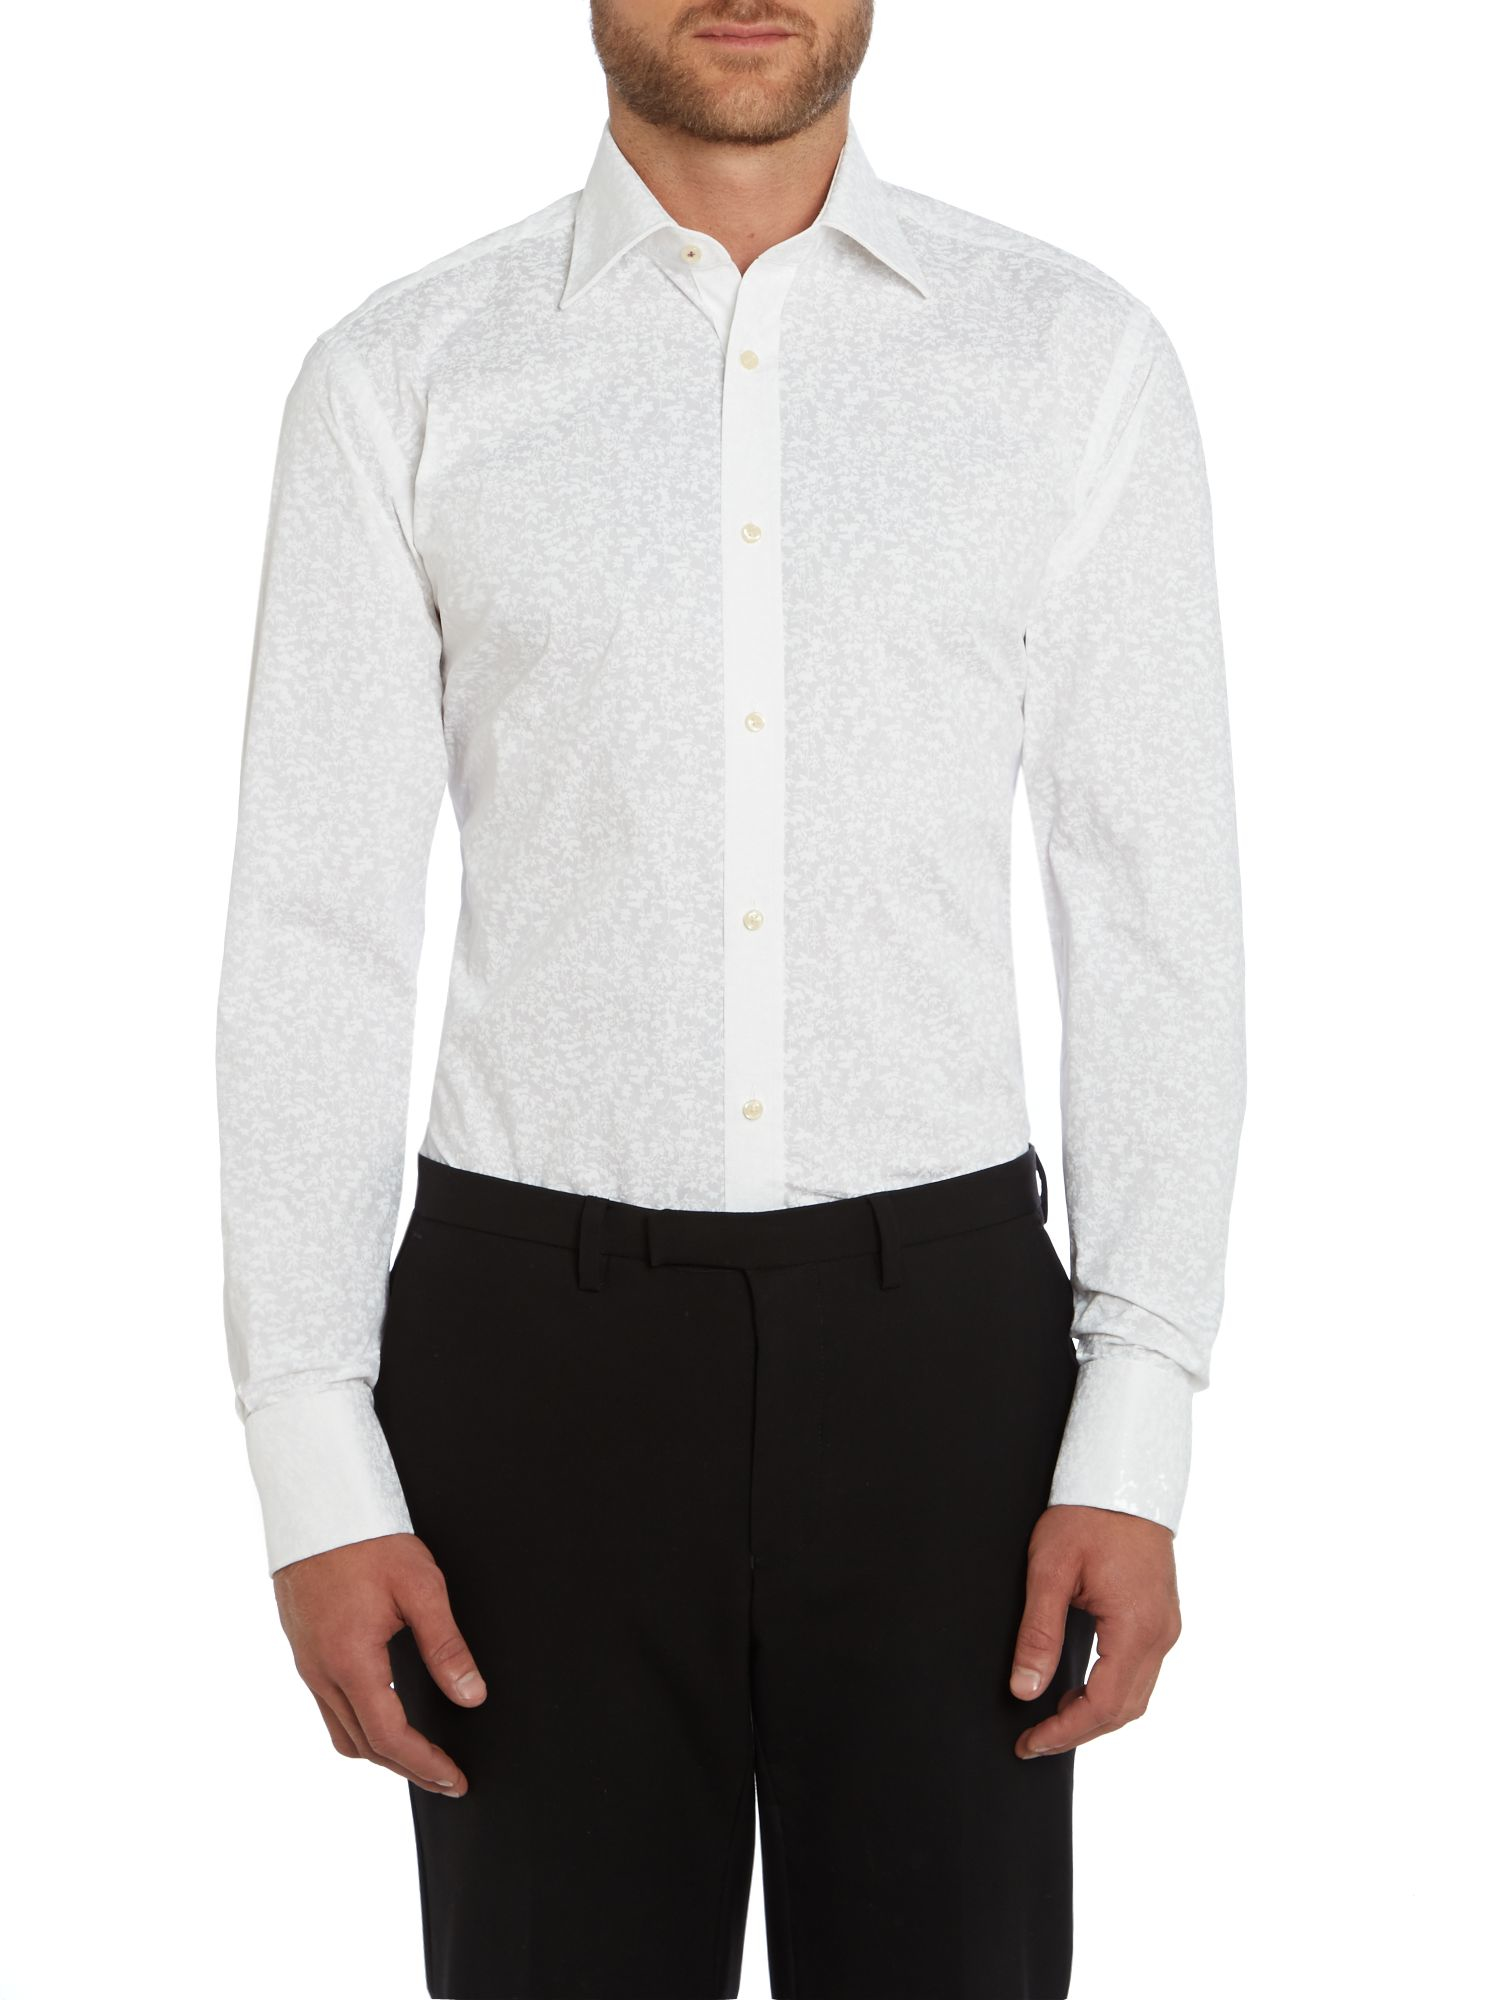 Ted Baker Flosho Floral Double Cuff Formal Shirt in White for Men - Lyst